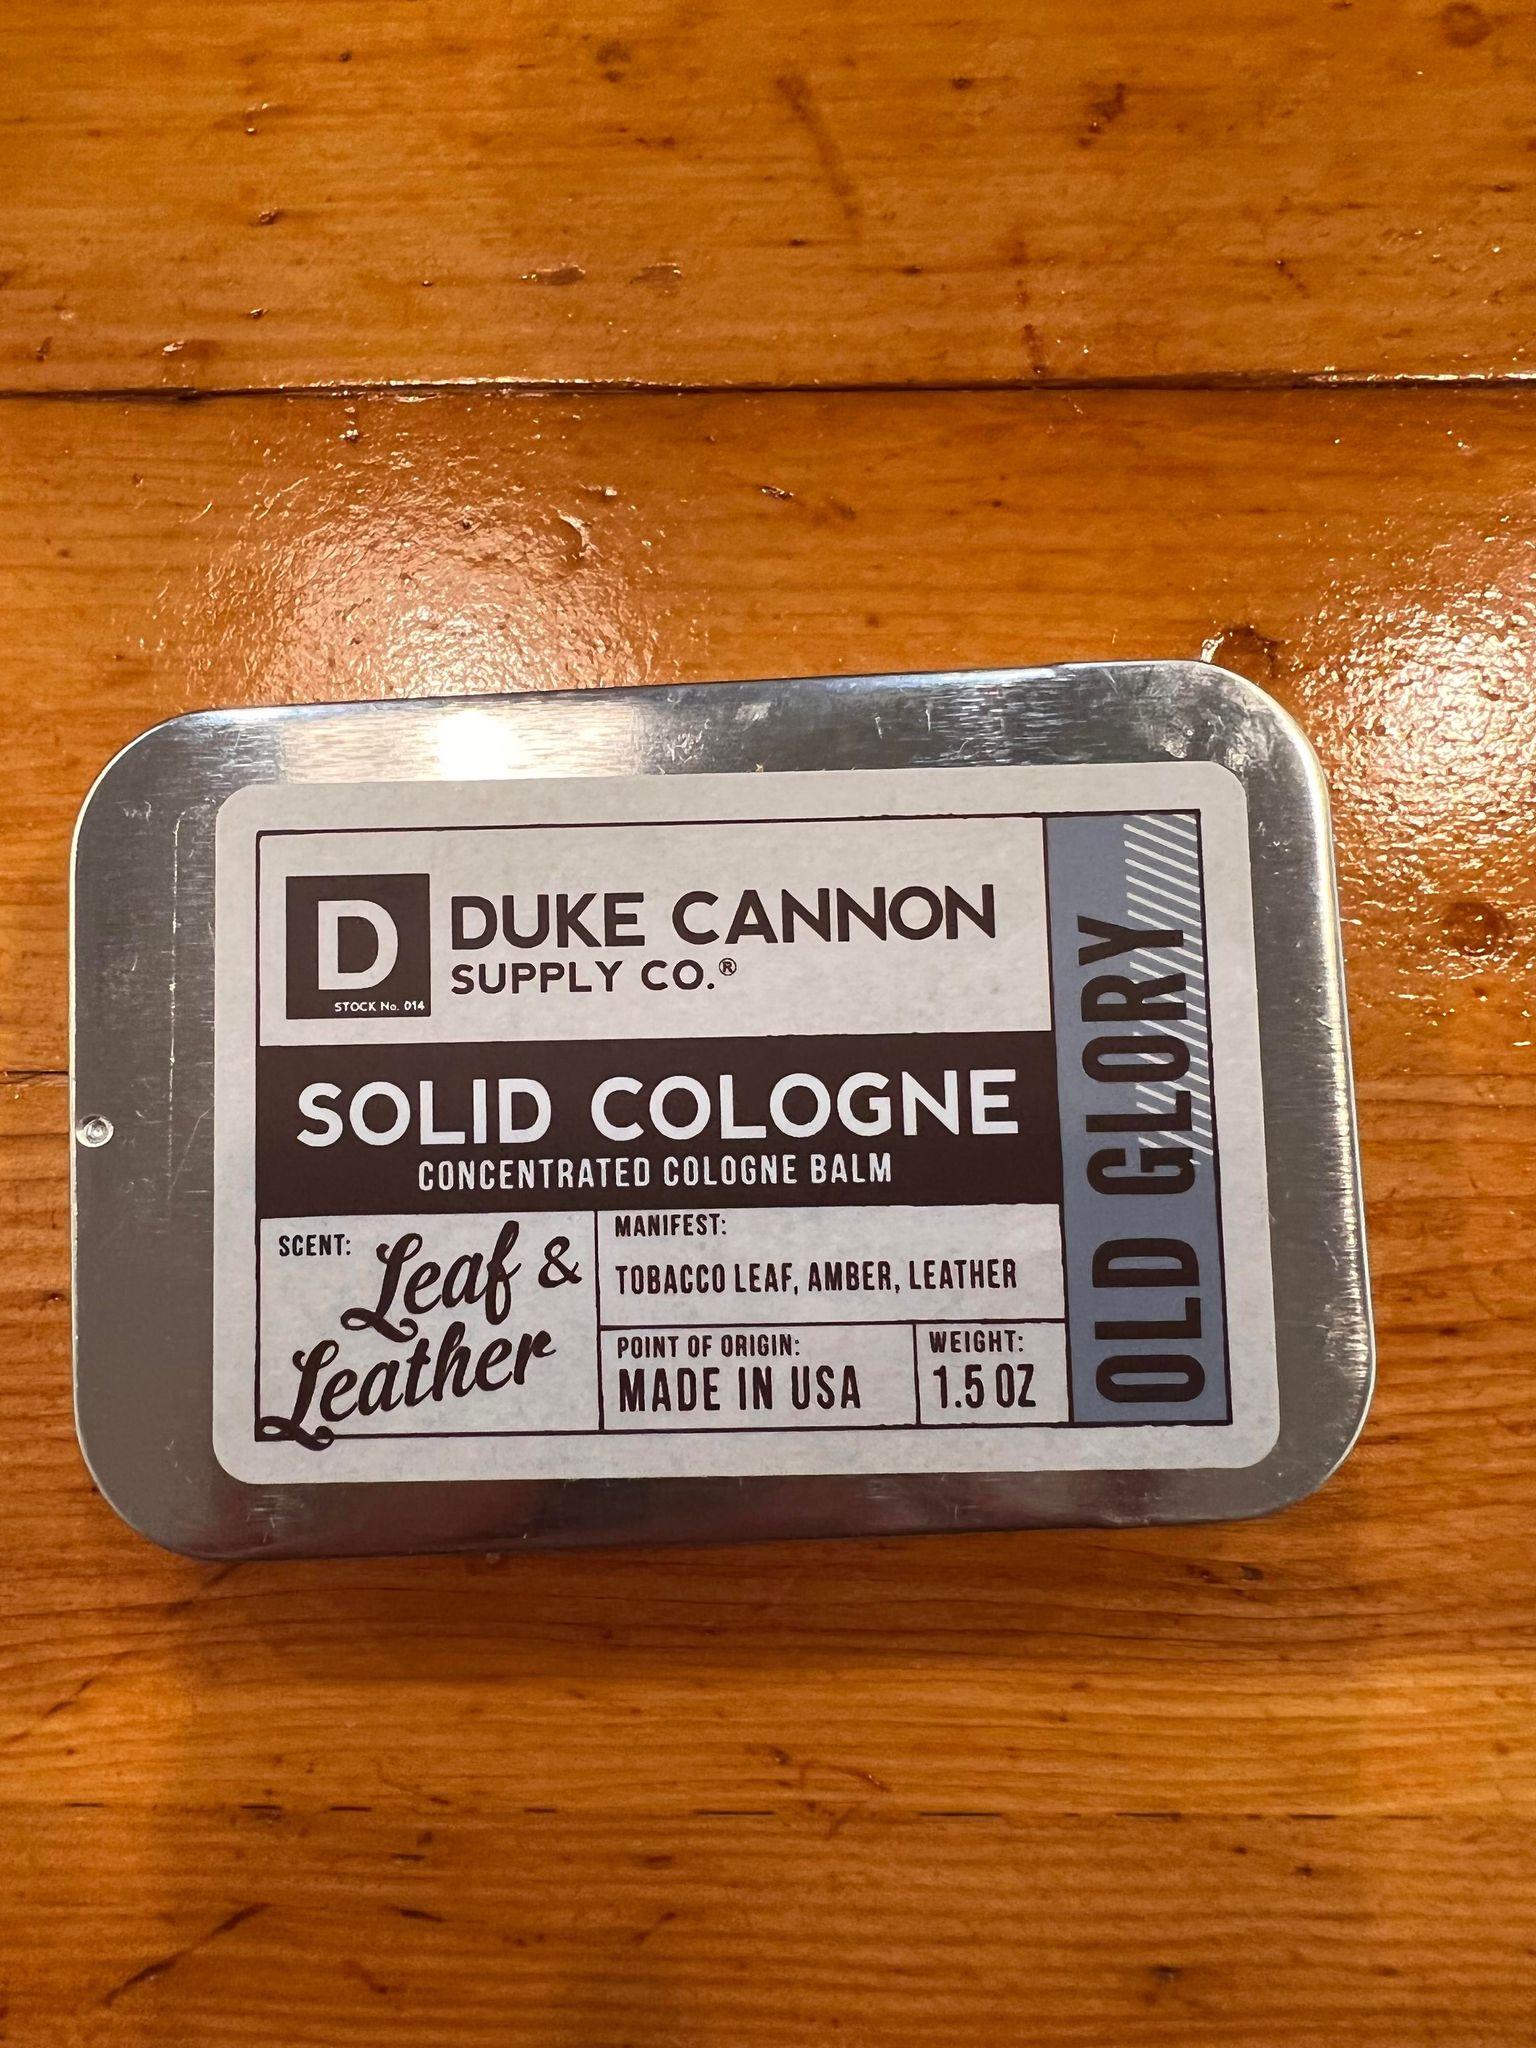 DUKE CANNON SOLID COLOGNE IN THE SCENT OLD GLORY